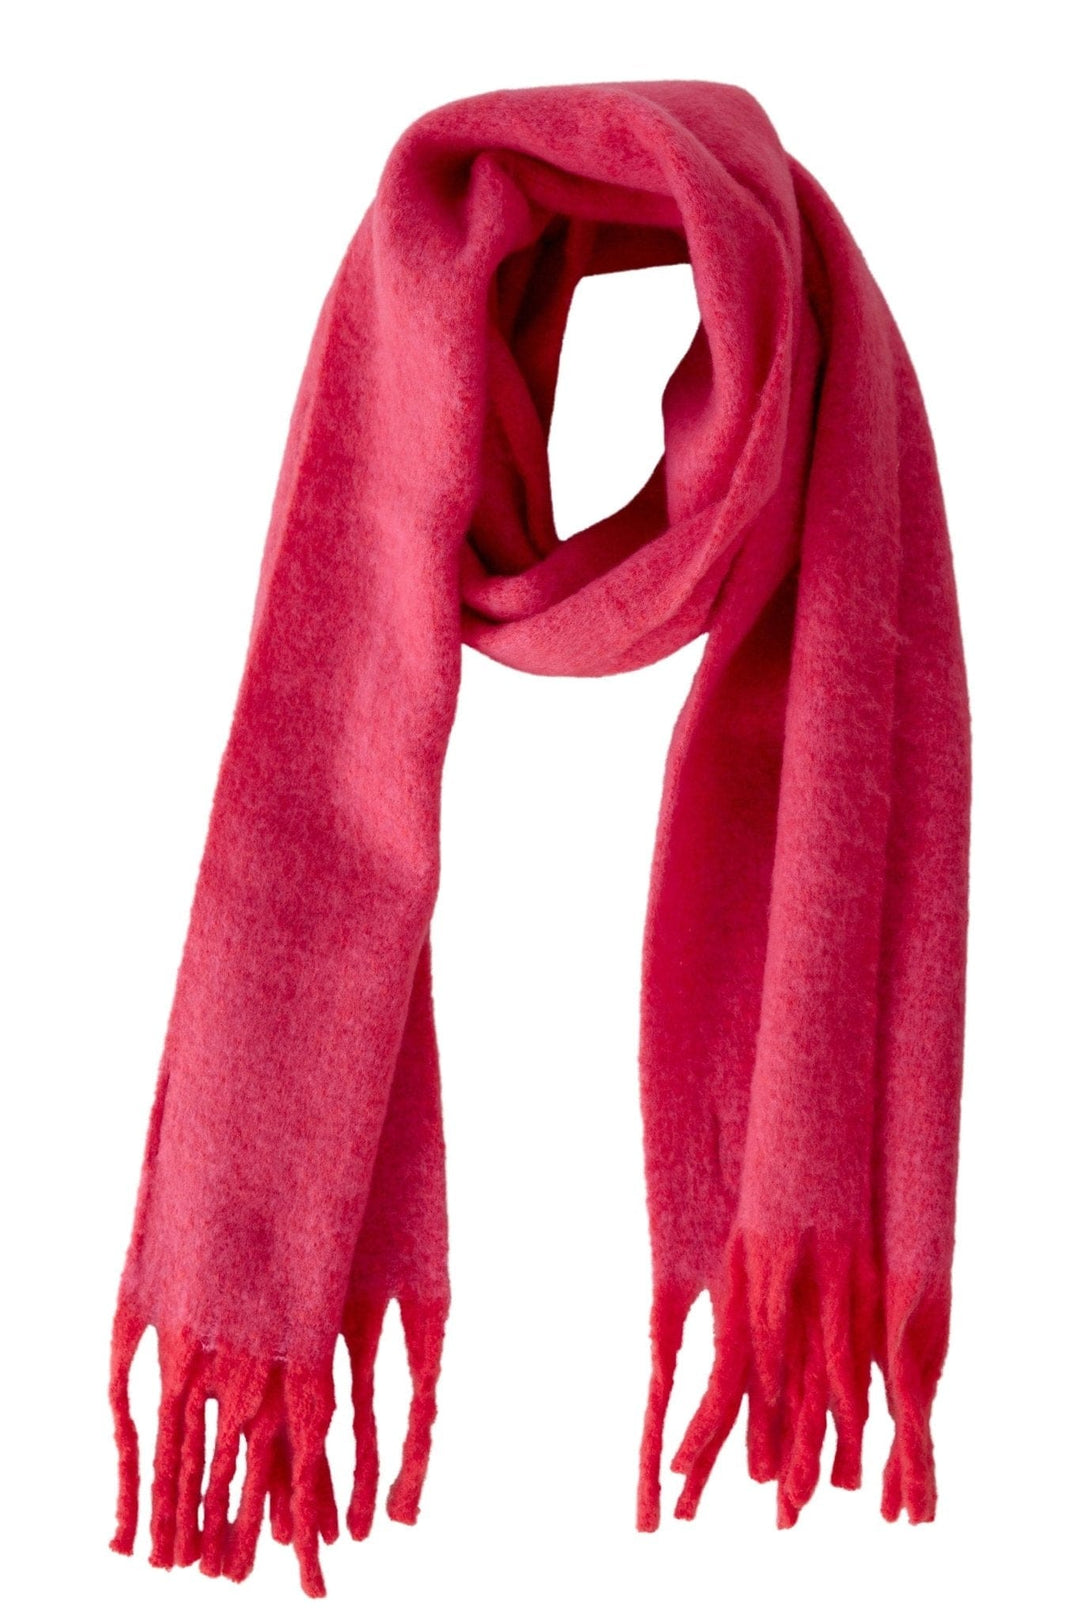 Oui Blanket Scarf With Tassels In Pink - Crabtree Cottage